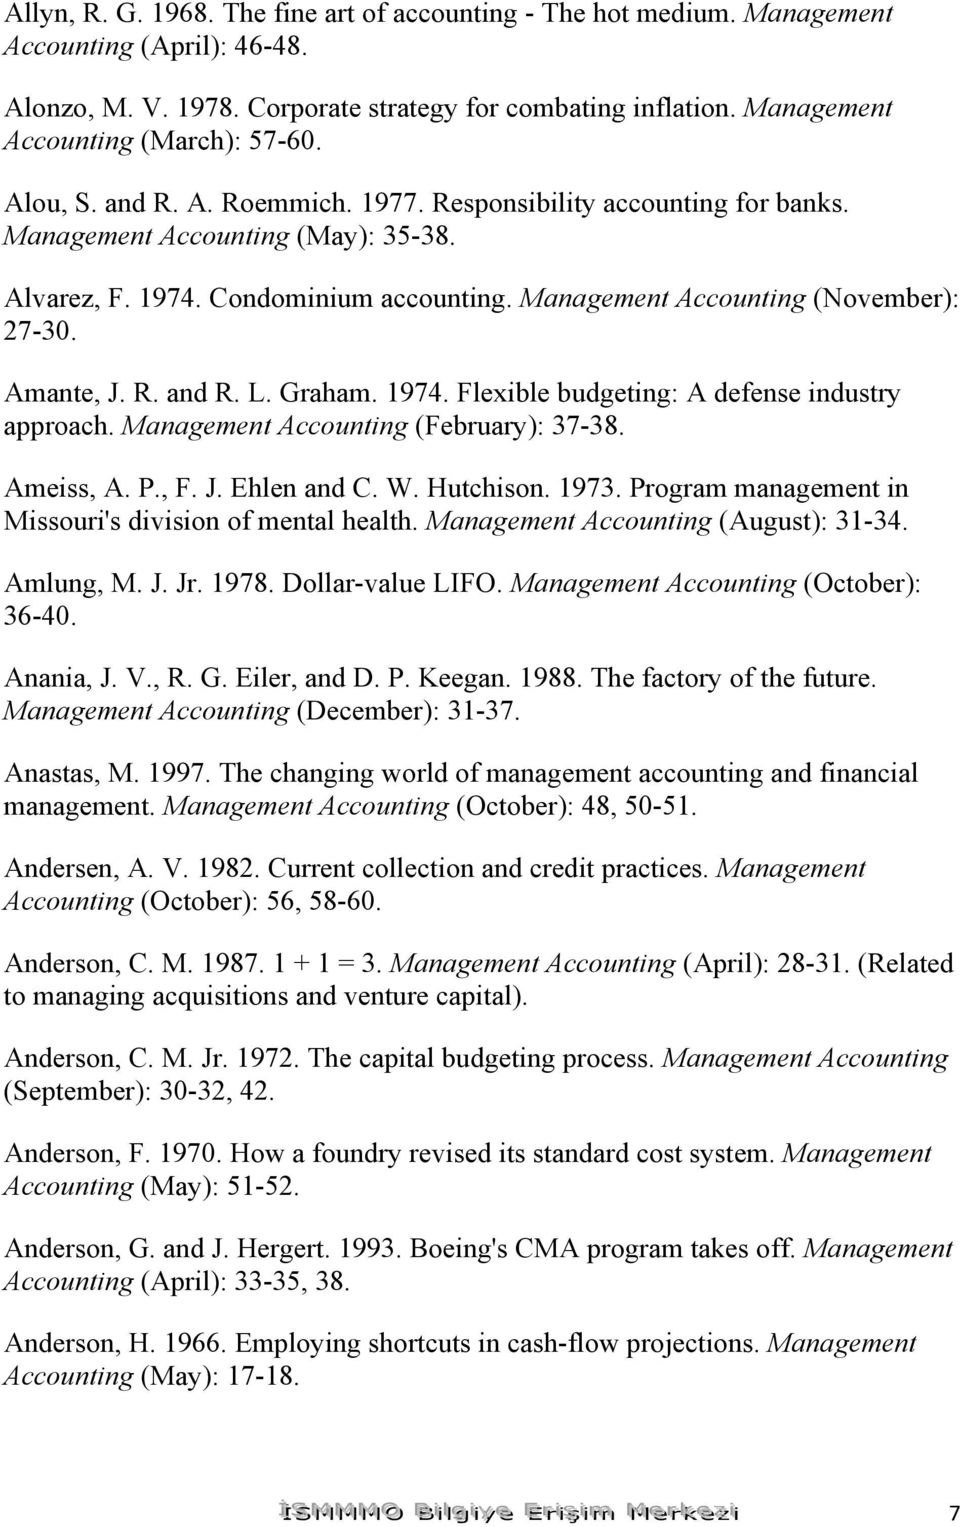 Management Accounting (November): 27-30. Amante, J. R. and R. L. Graham. 1974. Flexible budgeting: A defense industry approach. Management Accounting (February): 37-38. Ameiss, A. P., F. J. Ehlen and C.